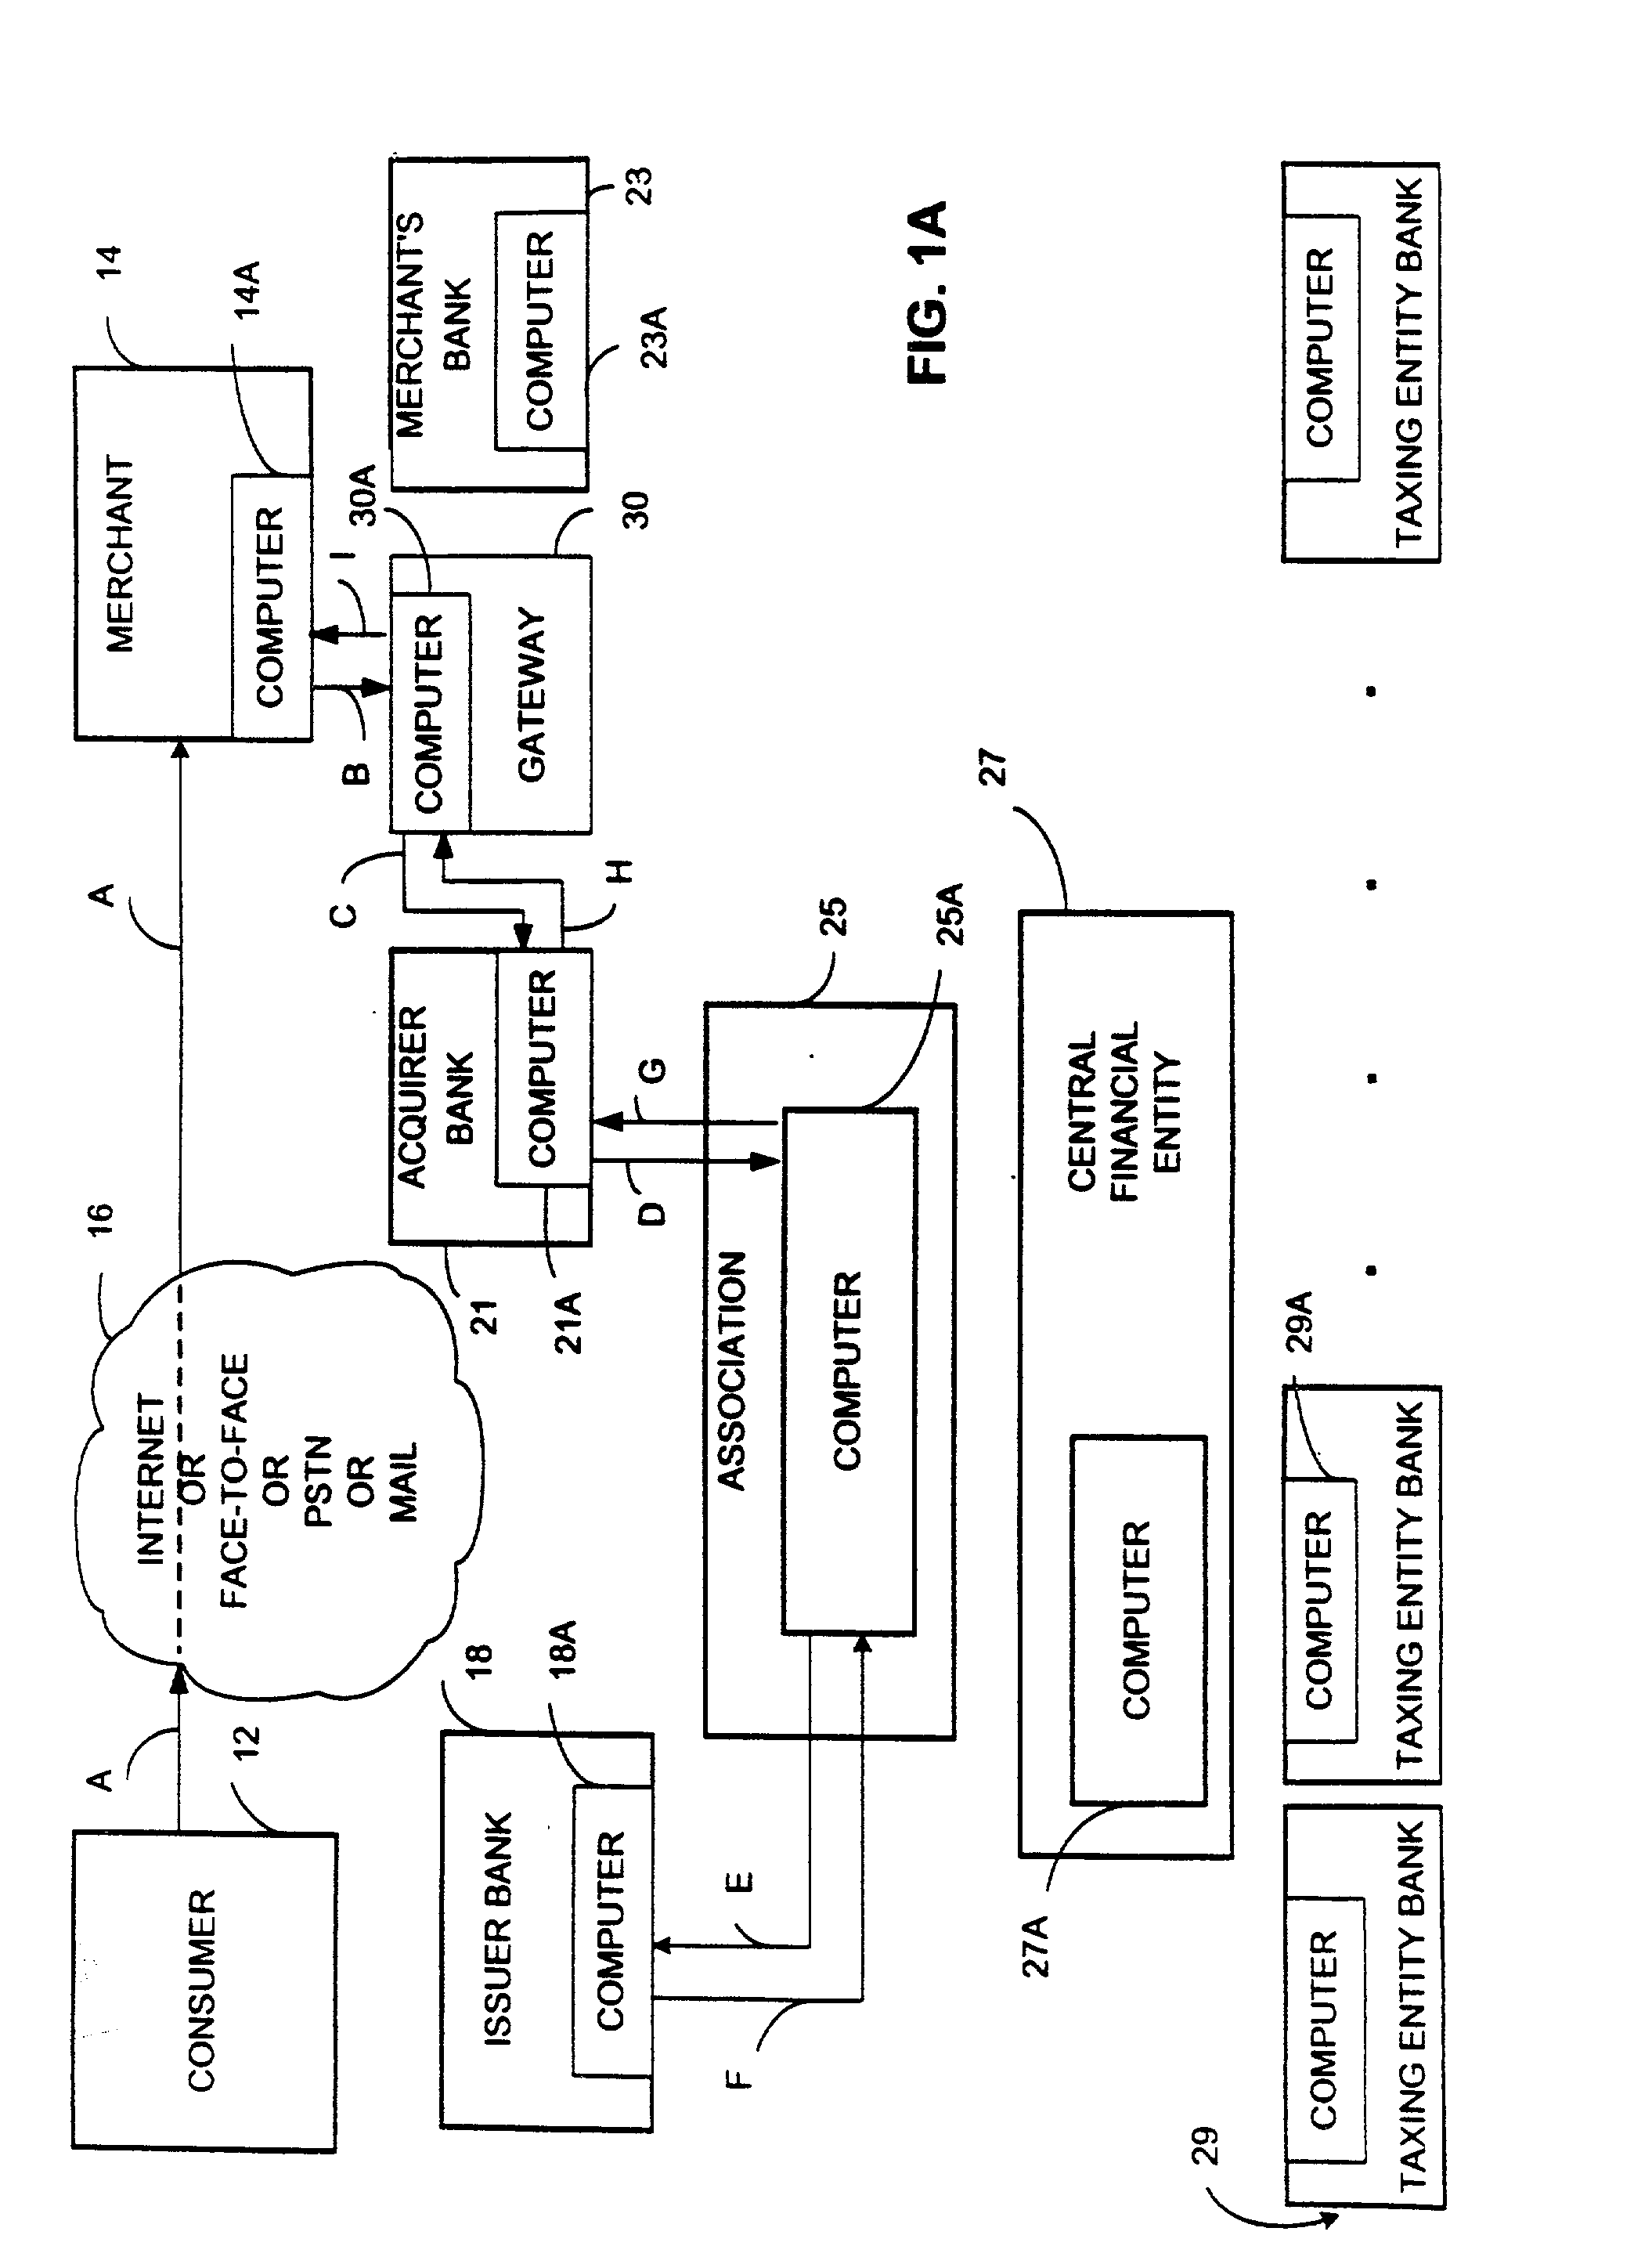 System for and method of rapid collection of income taxes